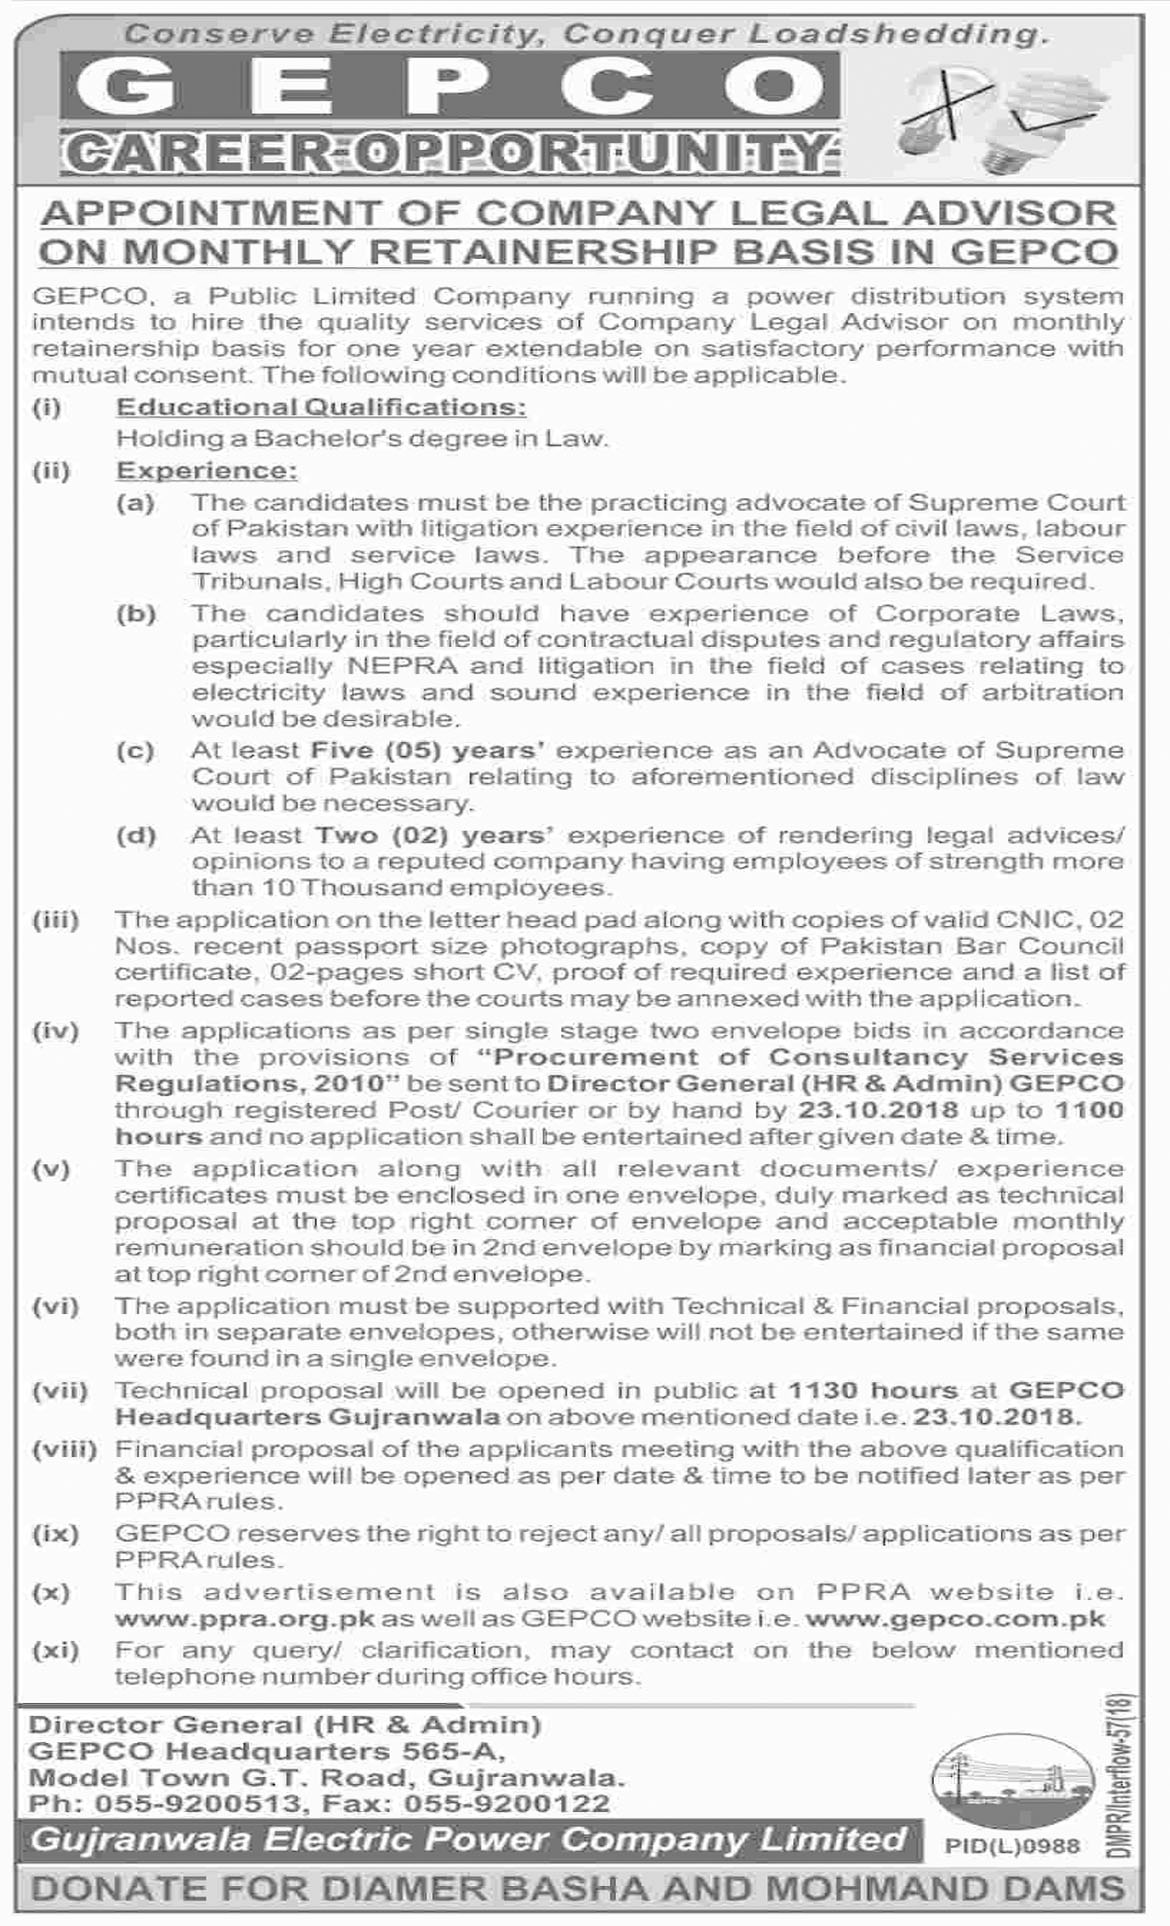 Jobs In Gujranwala Electric Power Company GEPCO 05 Oct 2018